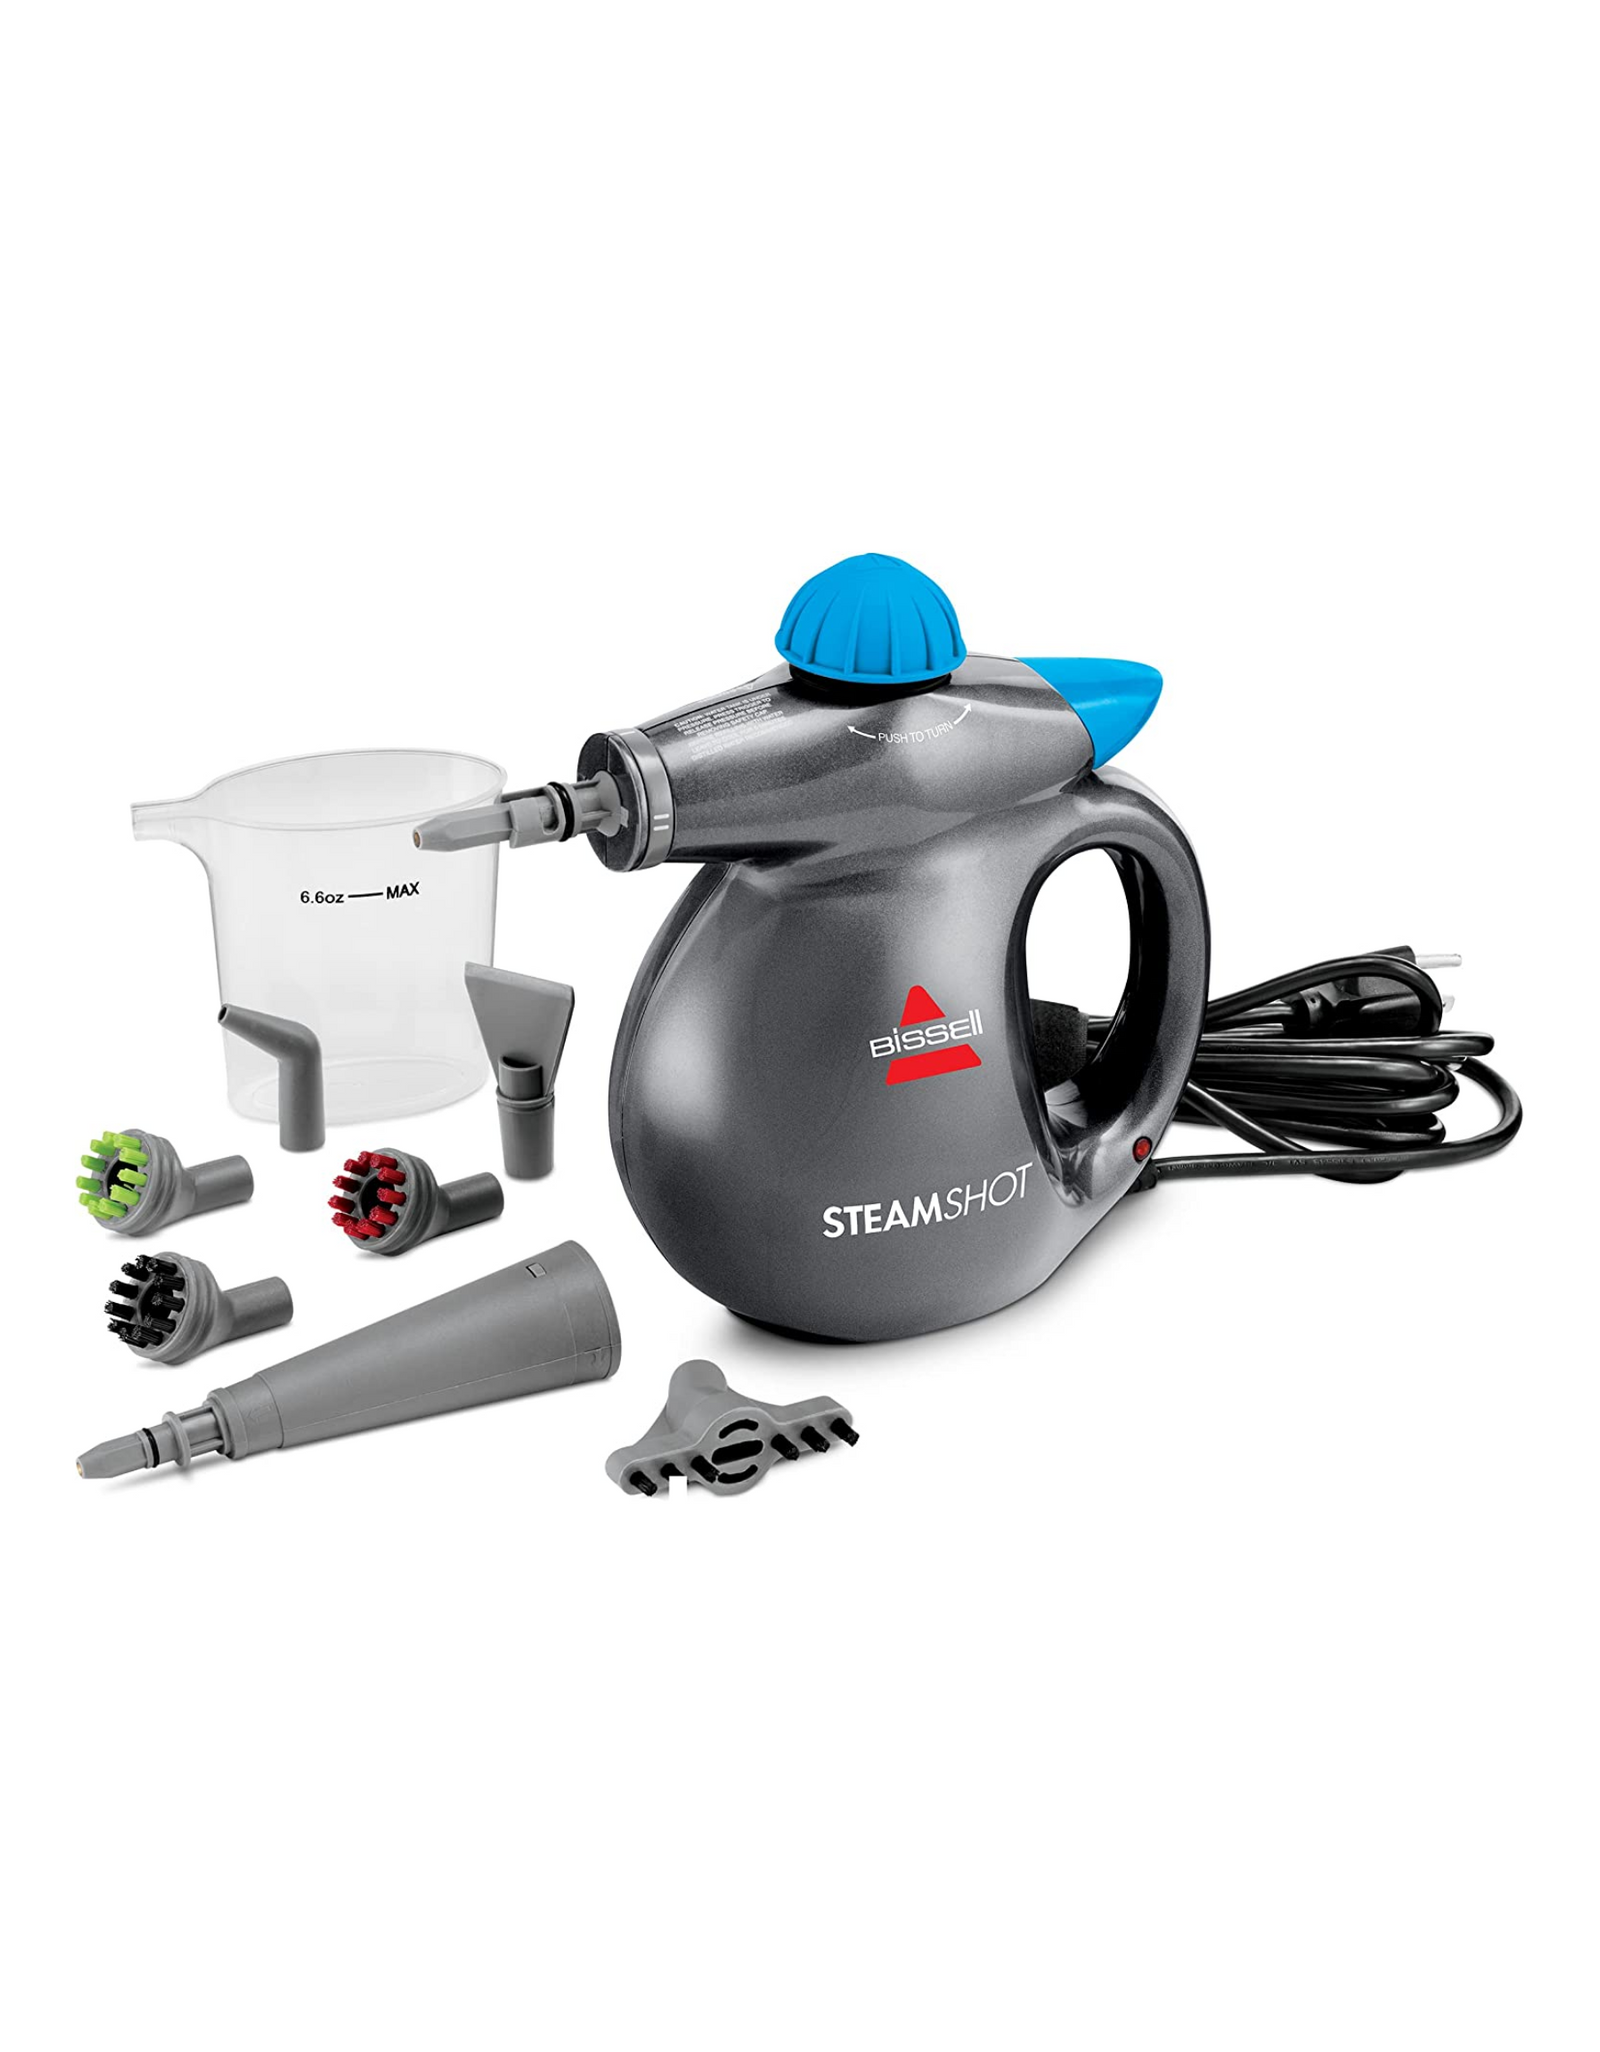 Bissell SteamShot Hard Surface Steam Cleaner (39N7V), with Multi-Surface Tools Included